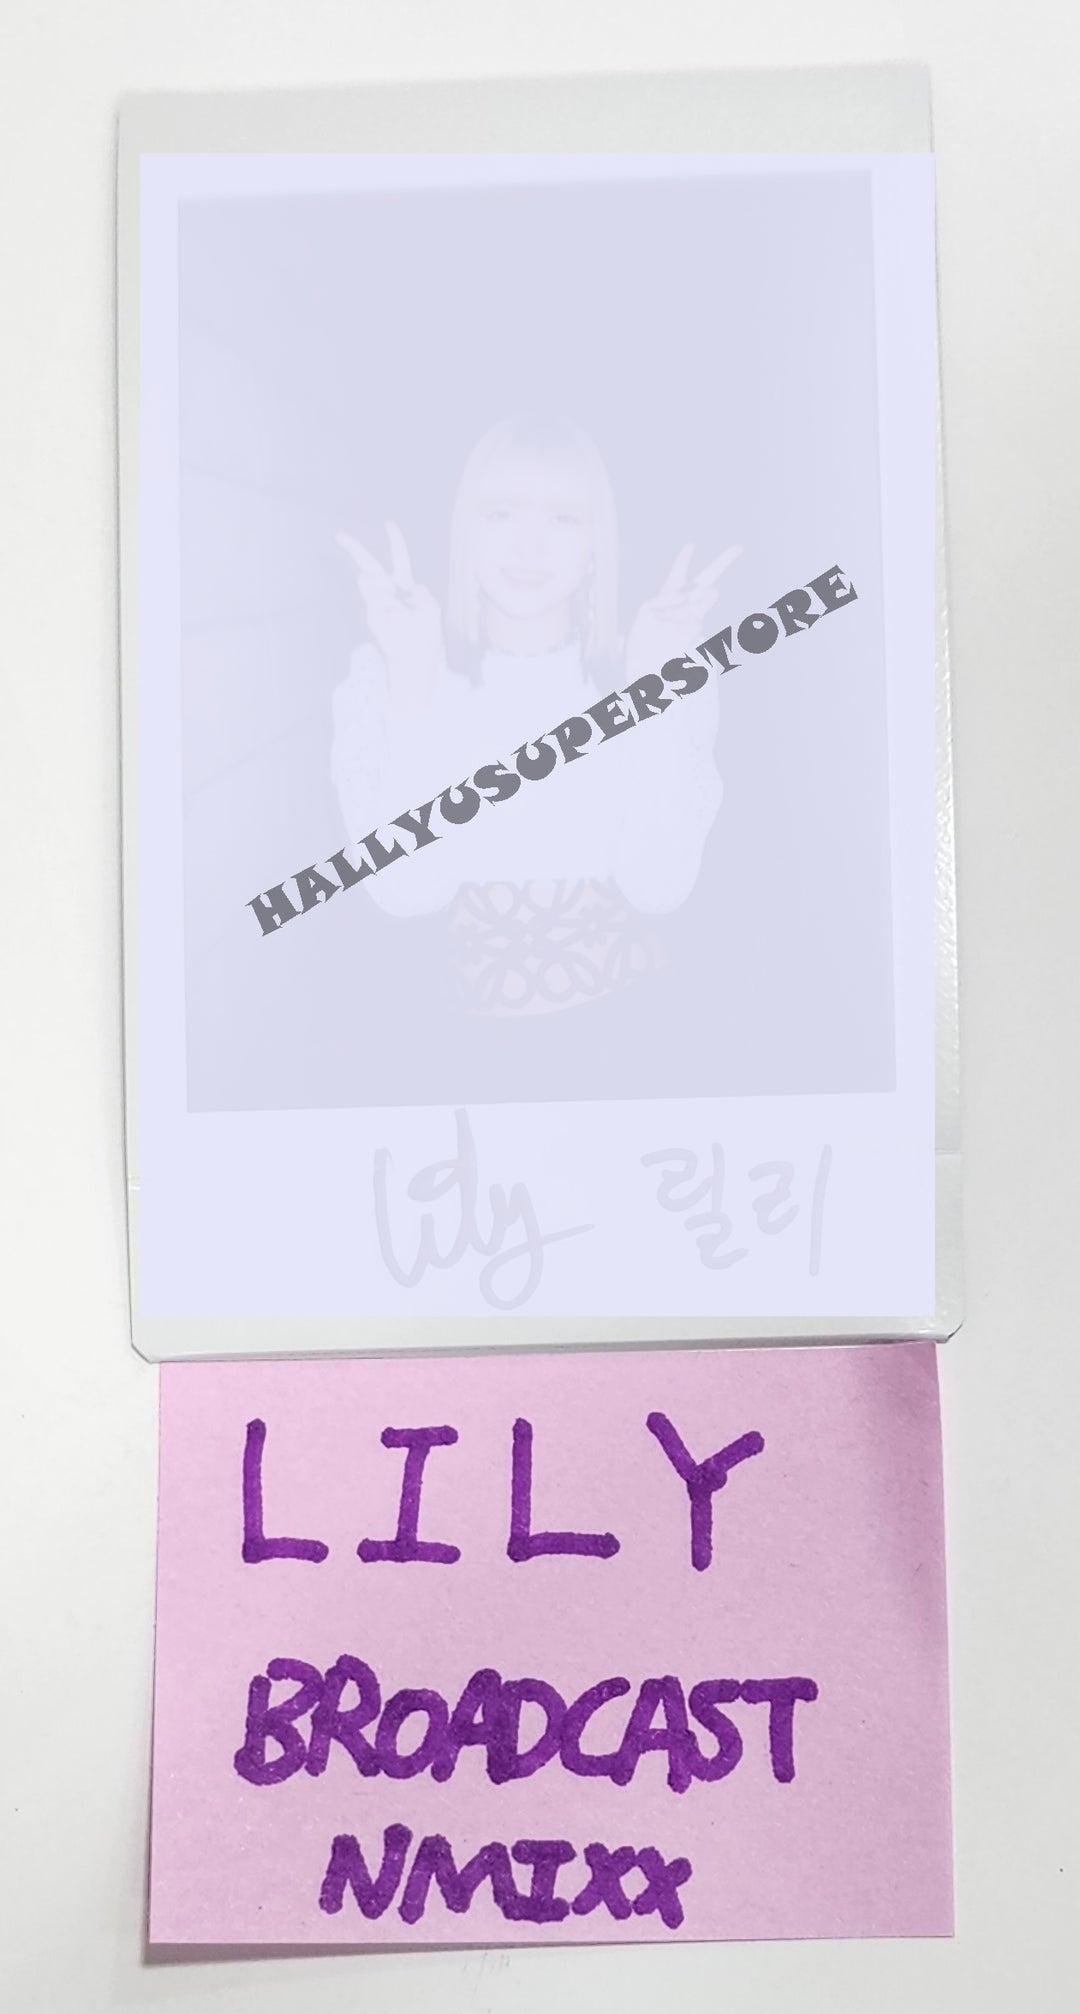 LILY (of NMIXX) 'ENTWURF' - Hand Autographed(Signed) Polaroid